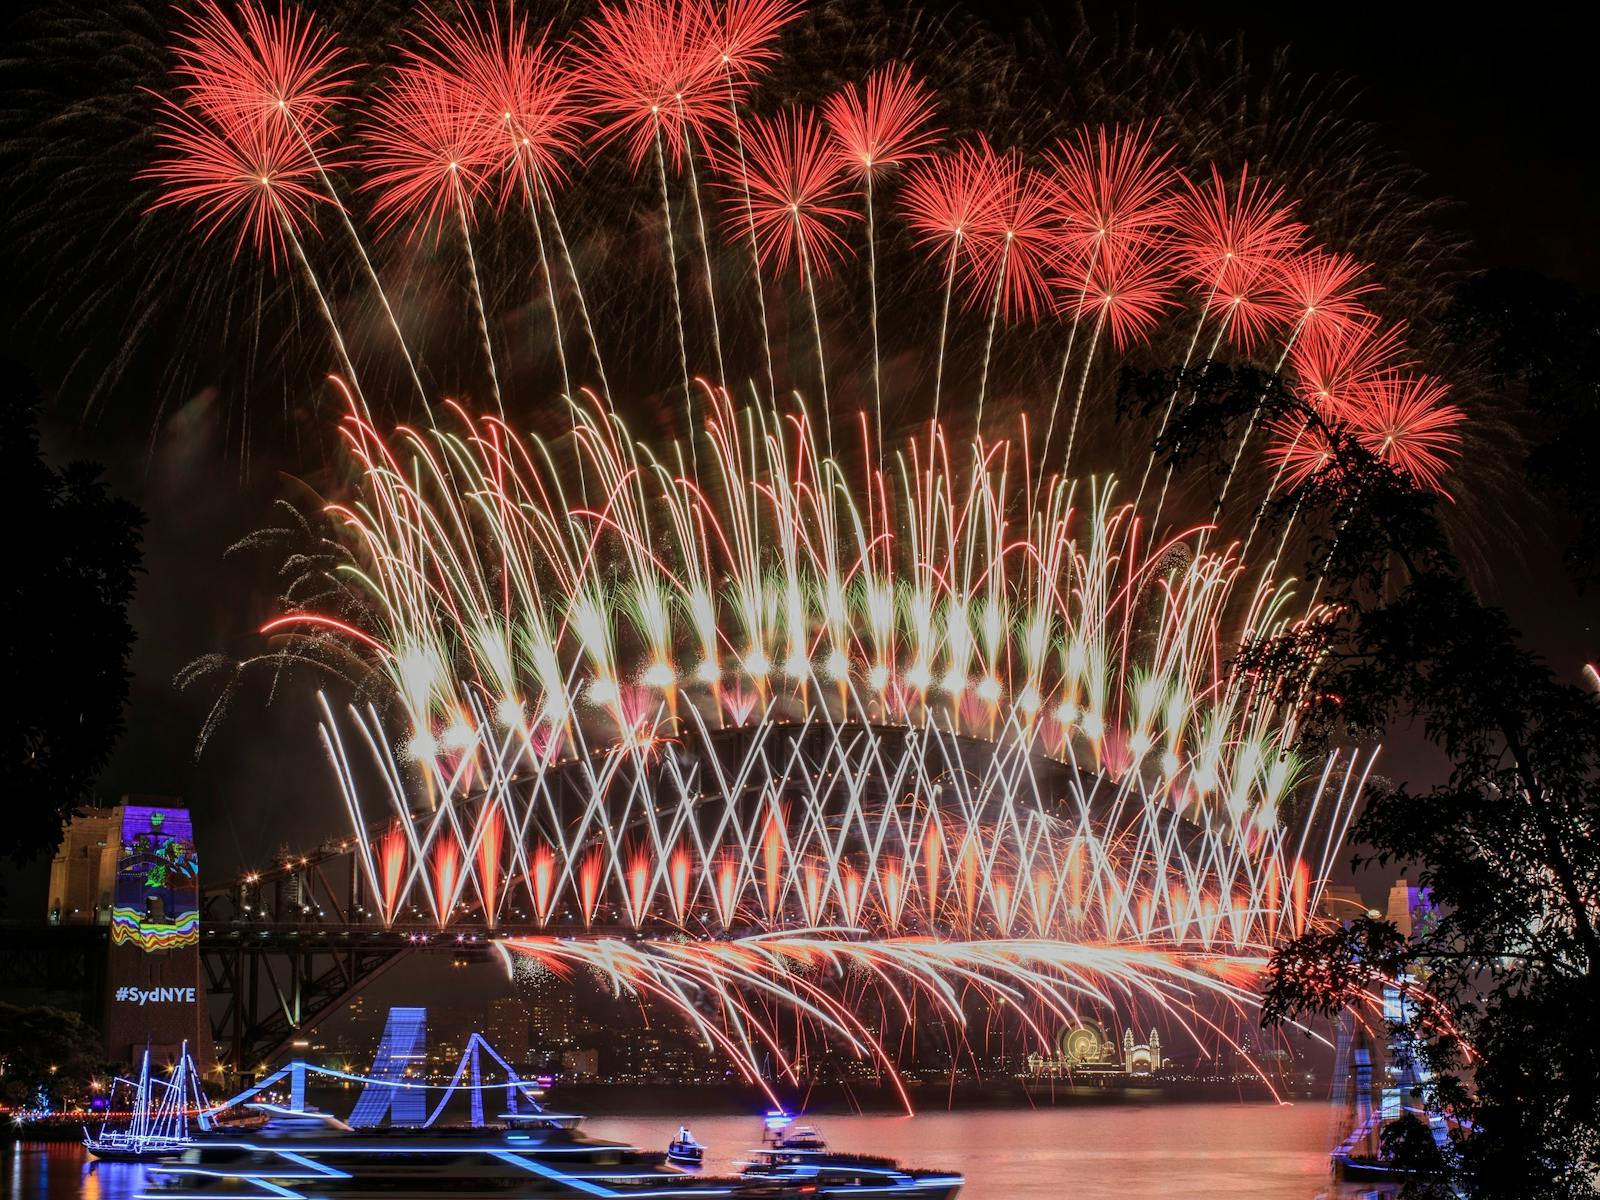 Image for Bridgeview - New Year's Eve at the Royal Botanic Garden Sydney